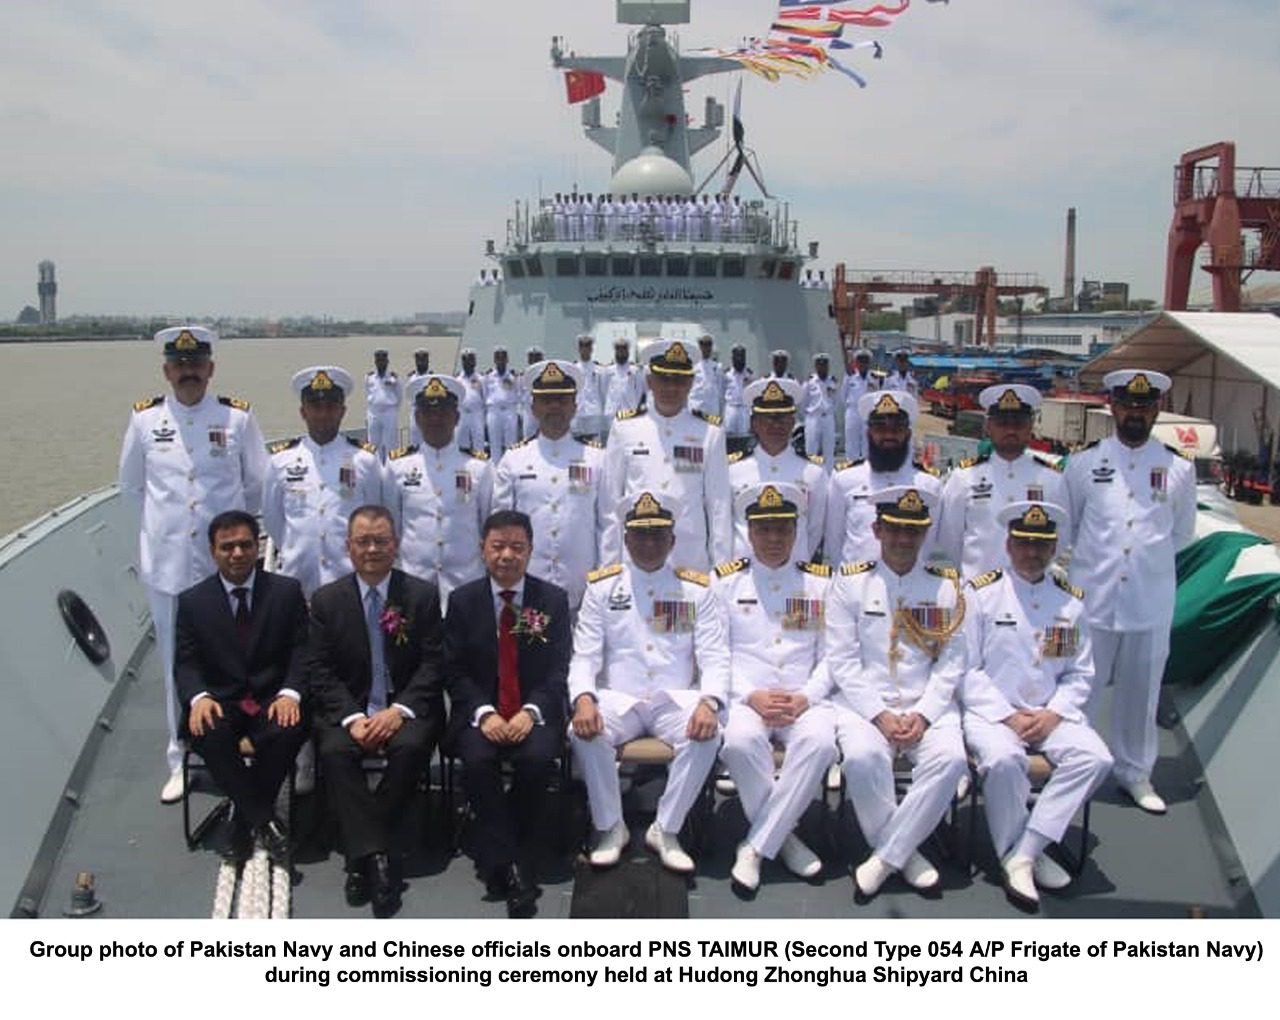 Commissioning ceremony of PNS Taimur